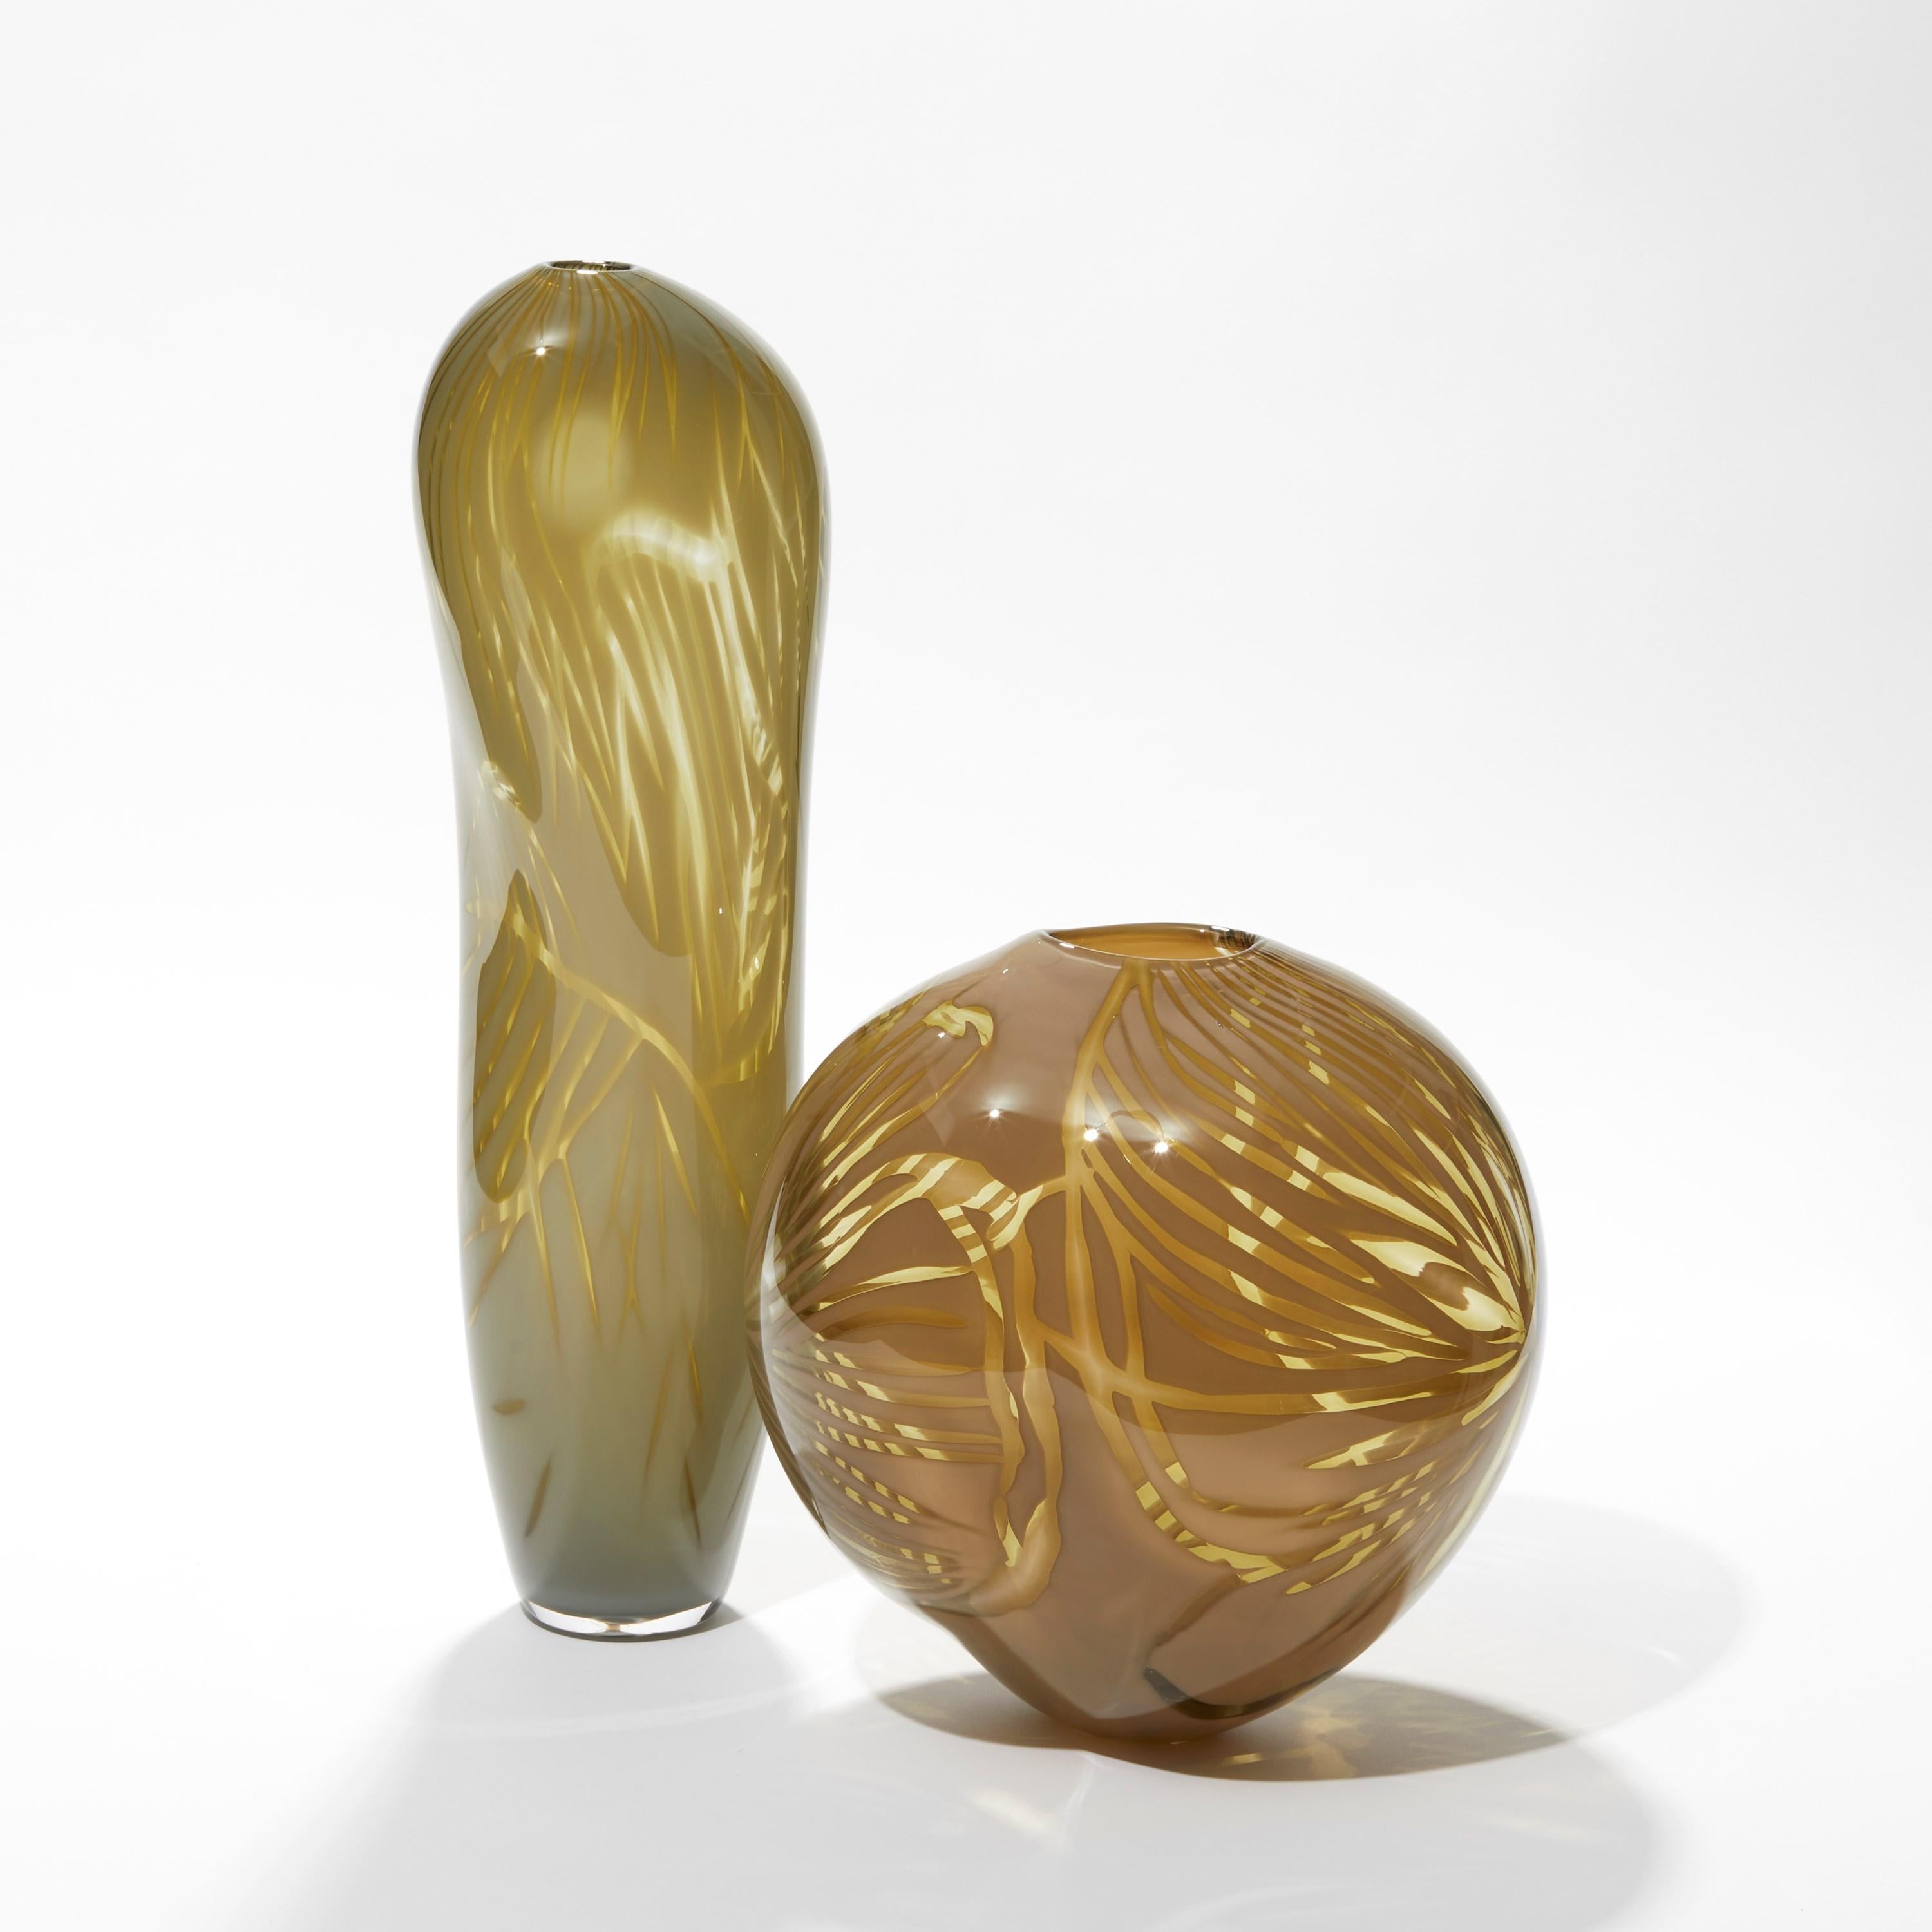 Hand-Crafted Nesiota, Olive / Khaki Green Sculptural Hand Blown Vase by Michèle Oberdieck For Sale